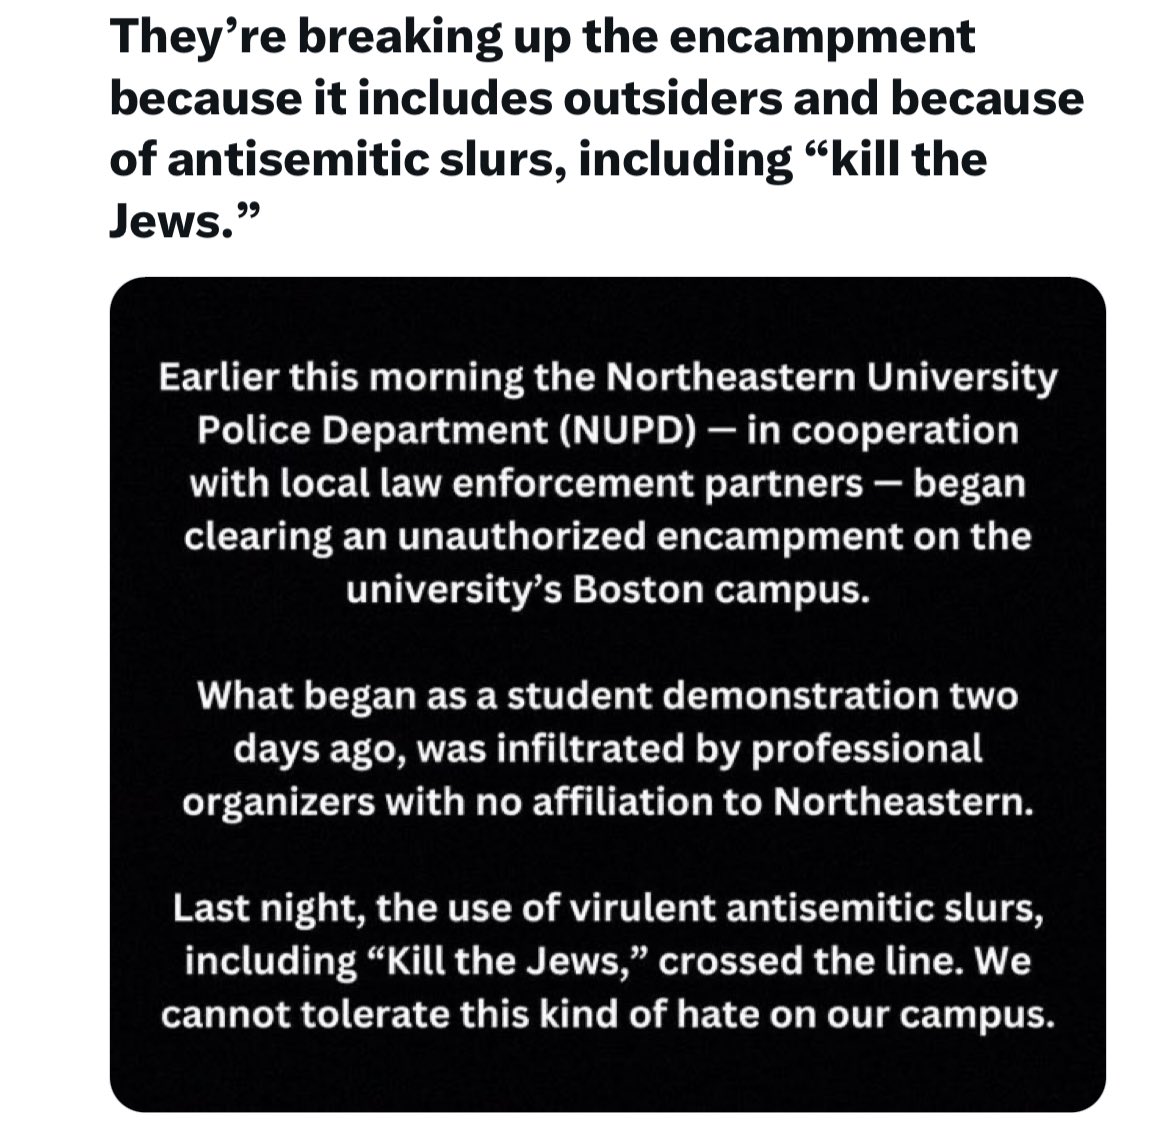 TY @Northeastern for supporting the right of #Jewish and all students to a welcoming, inclusive learning environment. 🙏 Reasonable time, place, manner regulations and policies for protests must be enforced—to protect free expression & the university mission! #LeadershipMatters